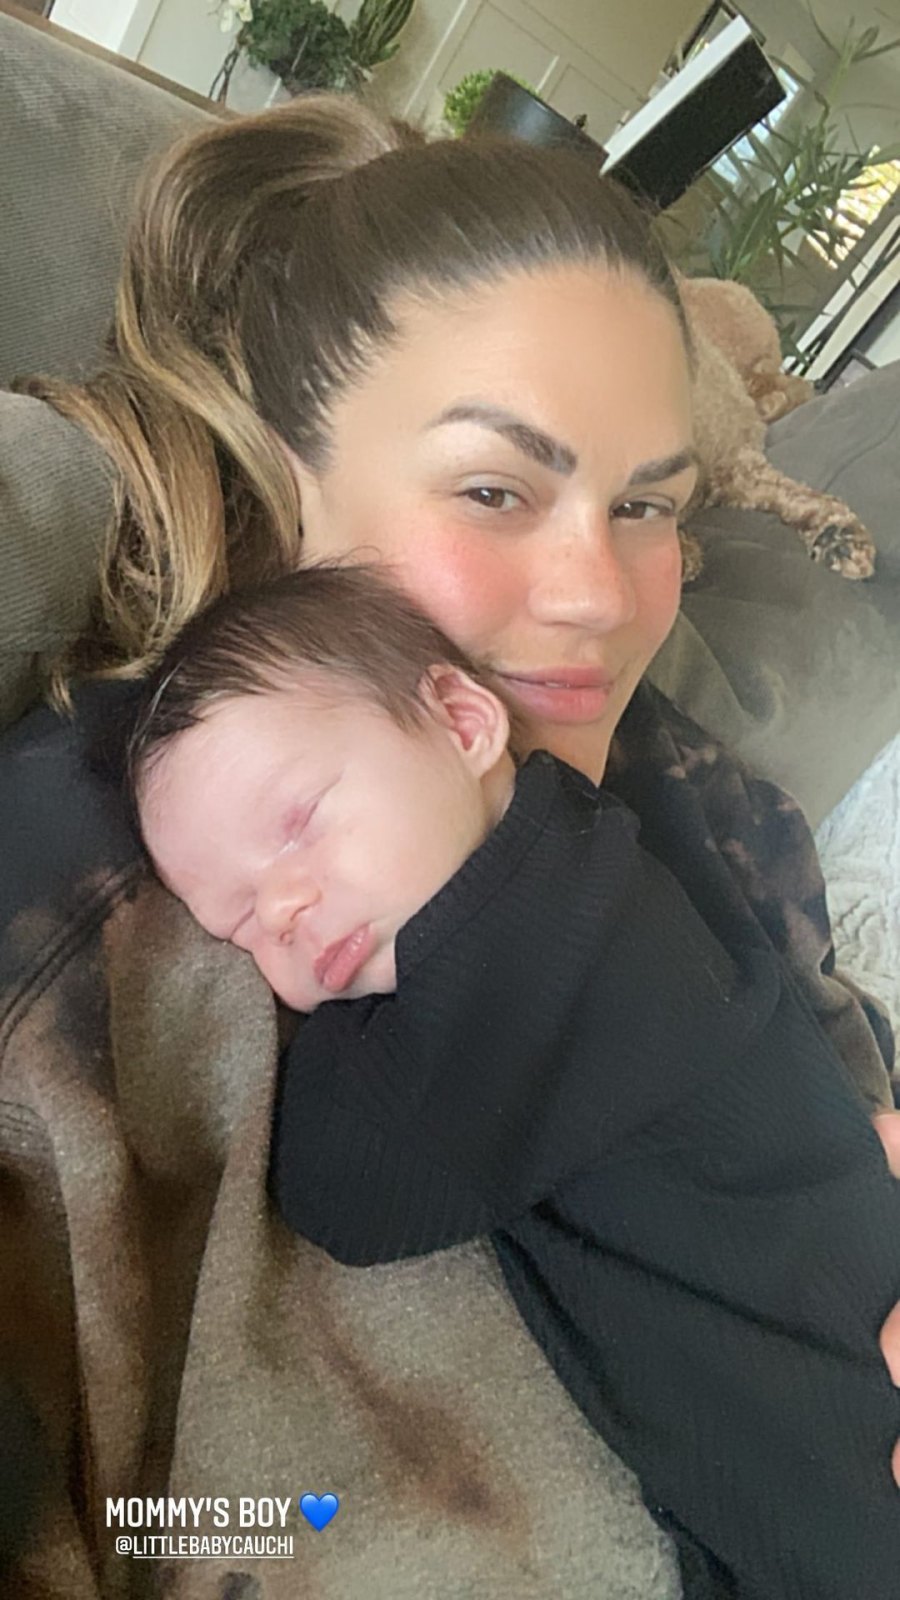 Mommy's Boy'! See Brittany Cartwright and Jax Taylor's Son Cruz's Album